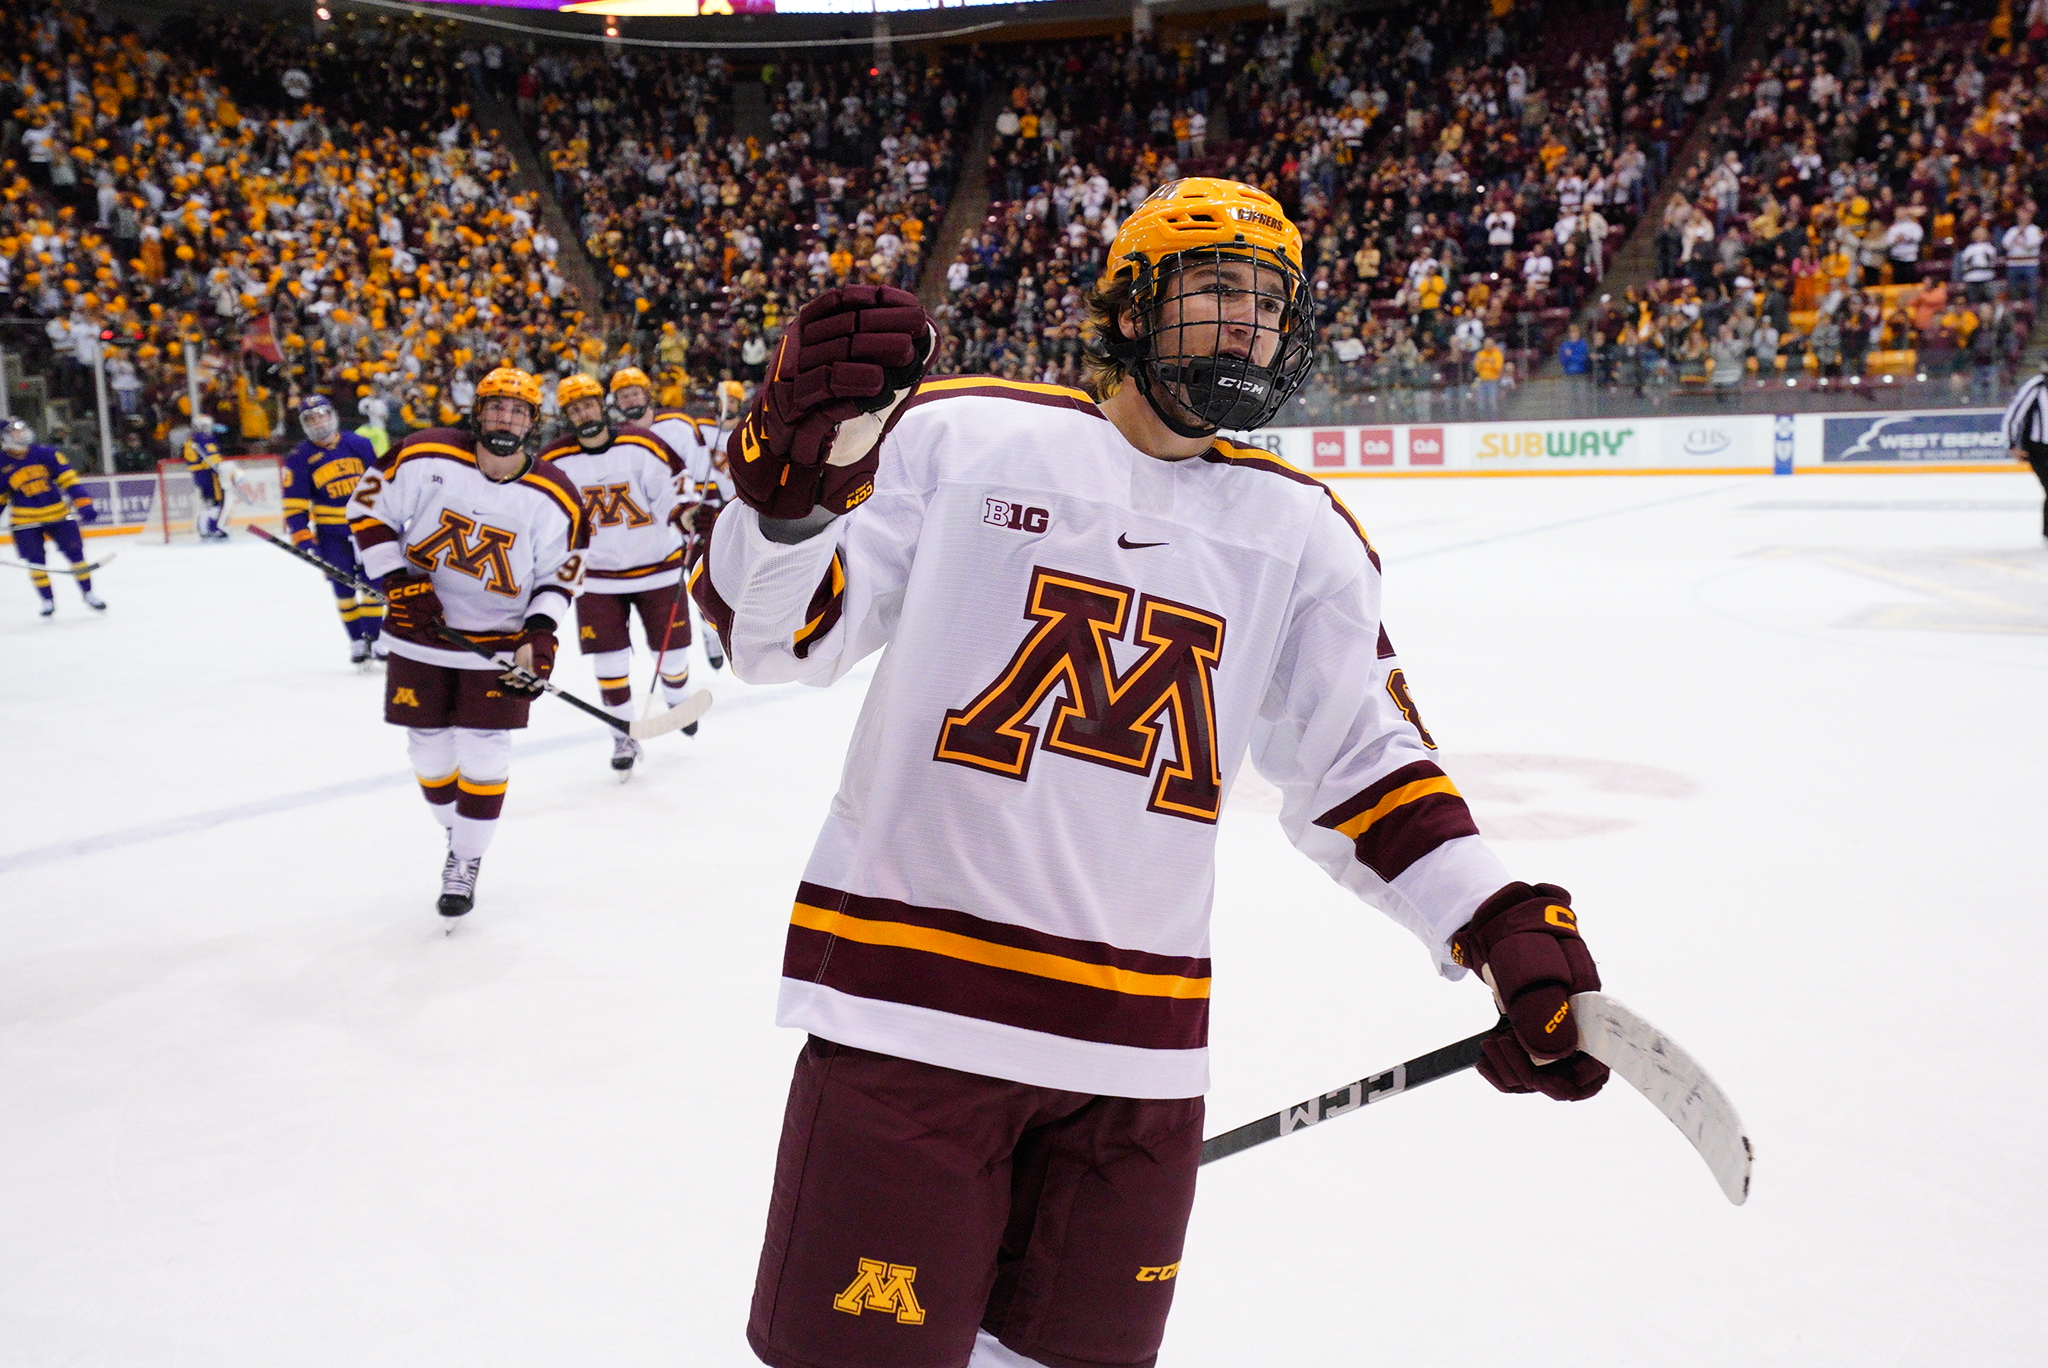 Gophers ranked No. 1 in latest USA Today college hockey poll Sports